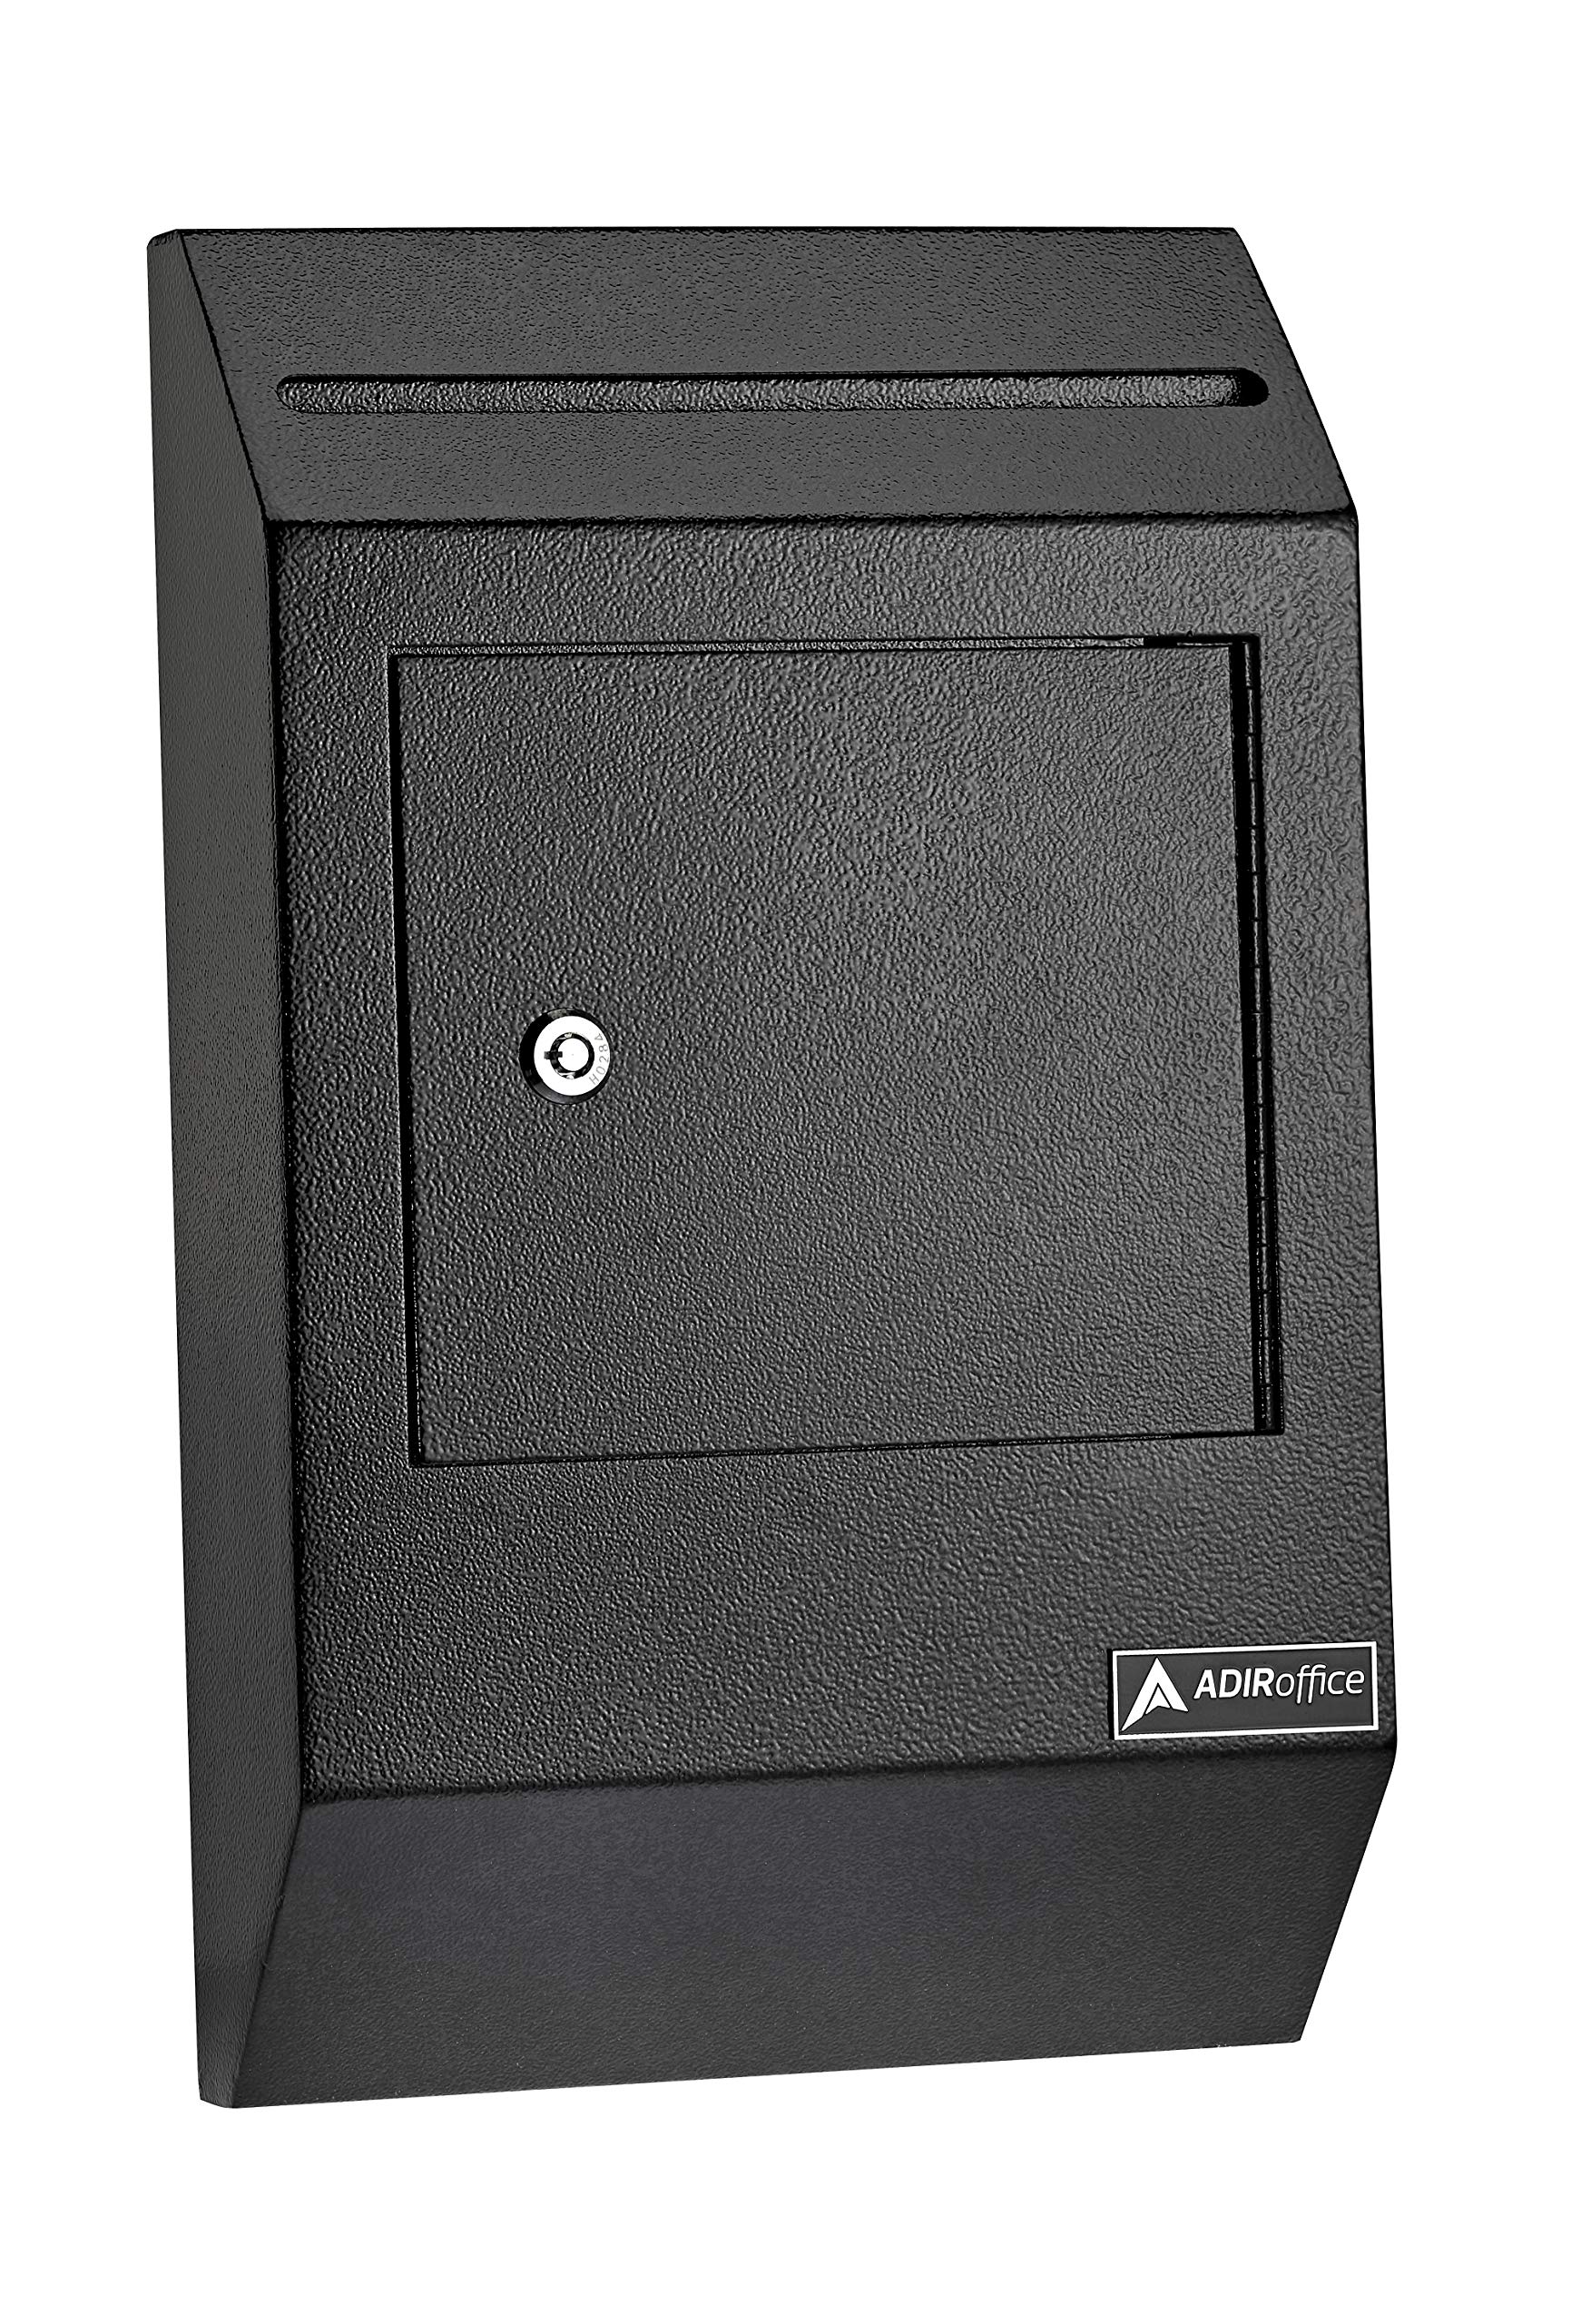 AdirOffice Drop Box - Heavy Duty Secured Storage with Lock - for Commercial Home Office or Business Use - Variation  - Very Good